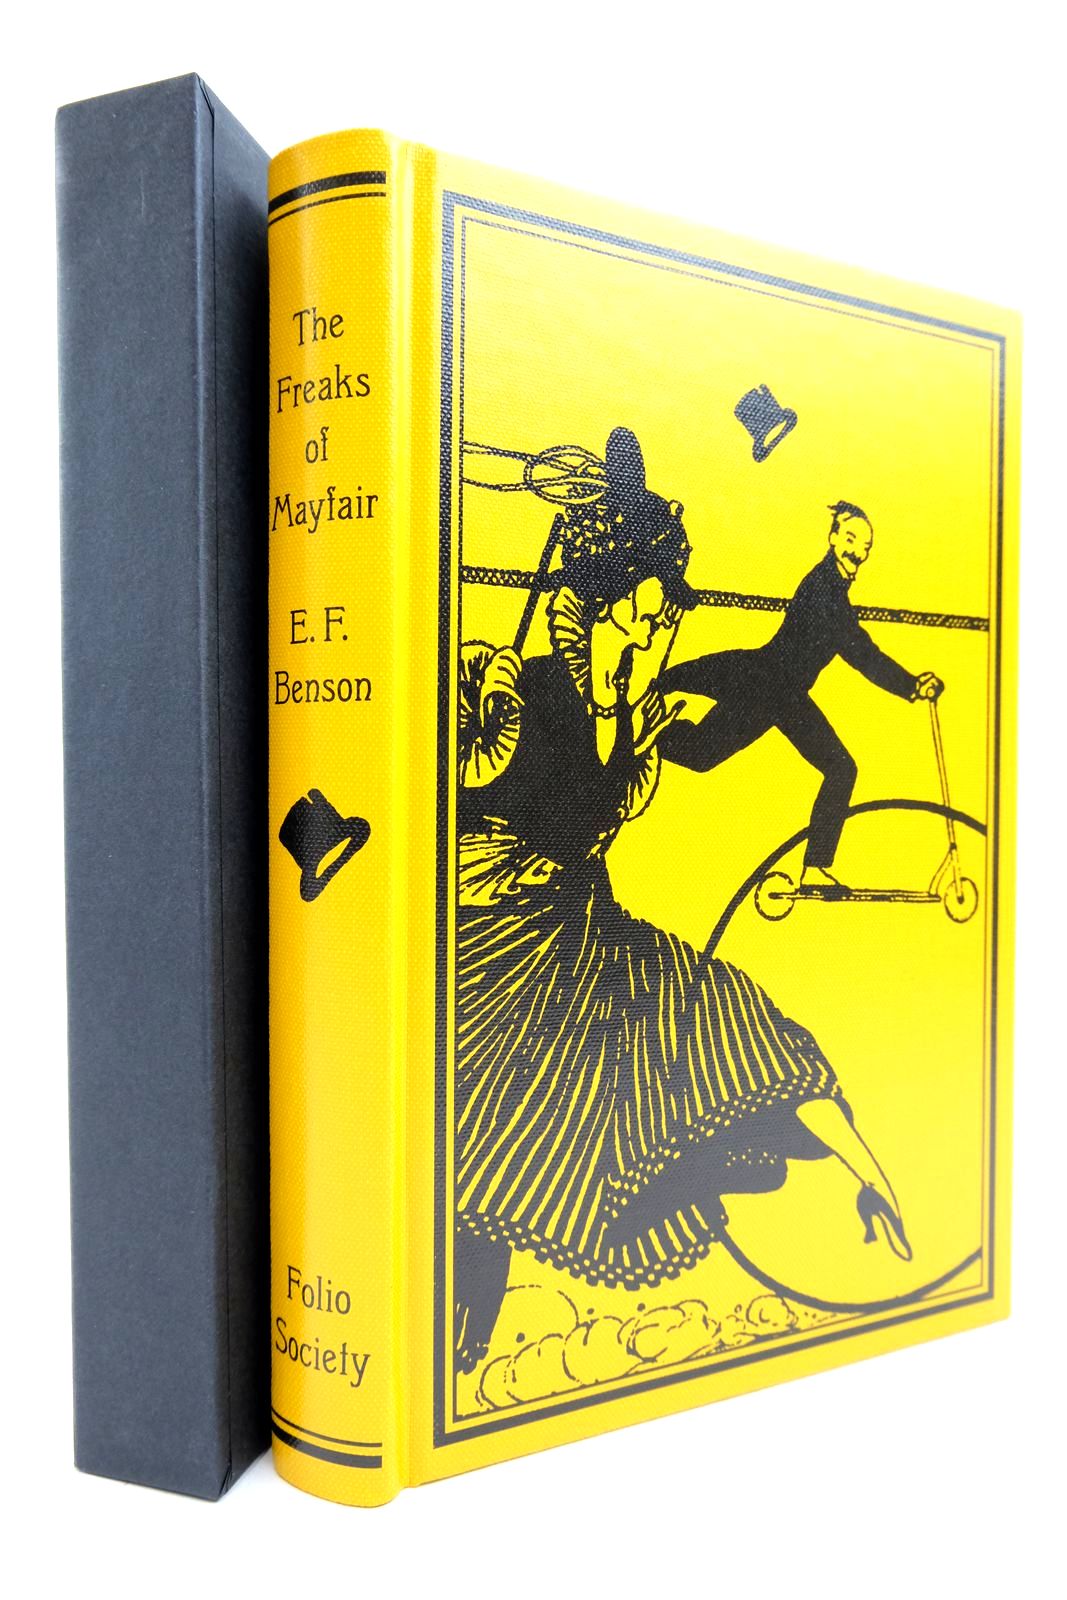 Photo of THE FREAKS OF MAYFAIR written by Benson, E.F. illustrated by Plank, George published by Folio Society (STOCK CODE: 2140240)  for sale by Stella & Rose's Books